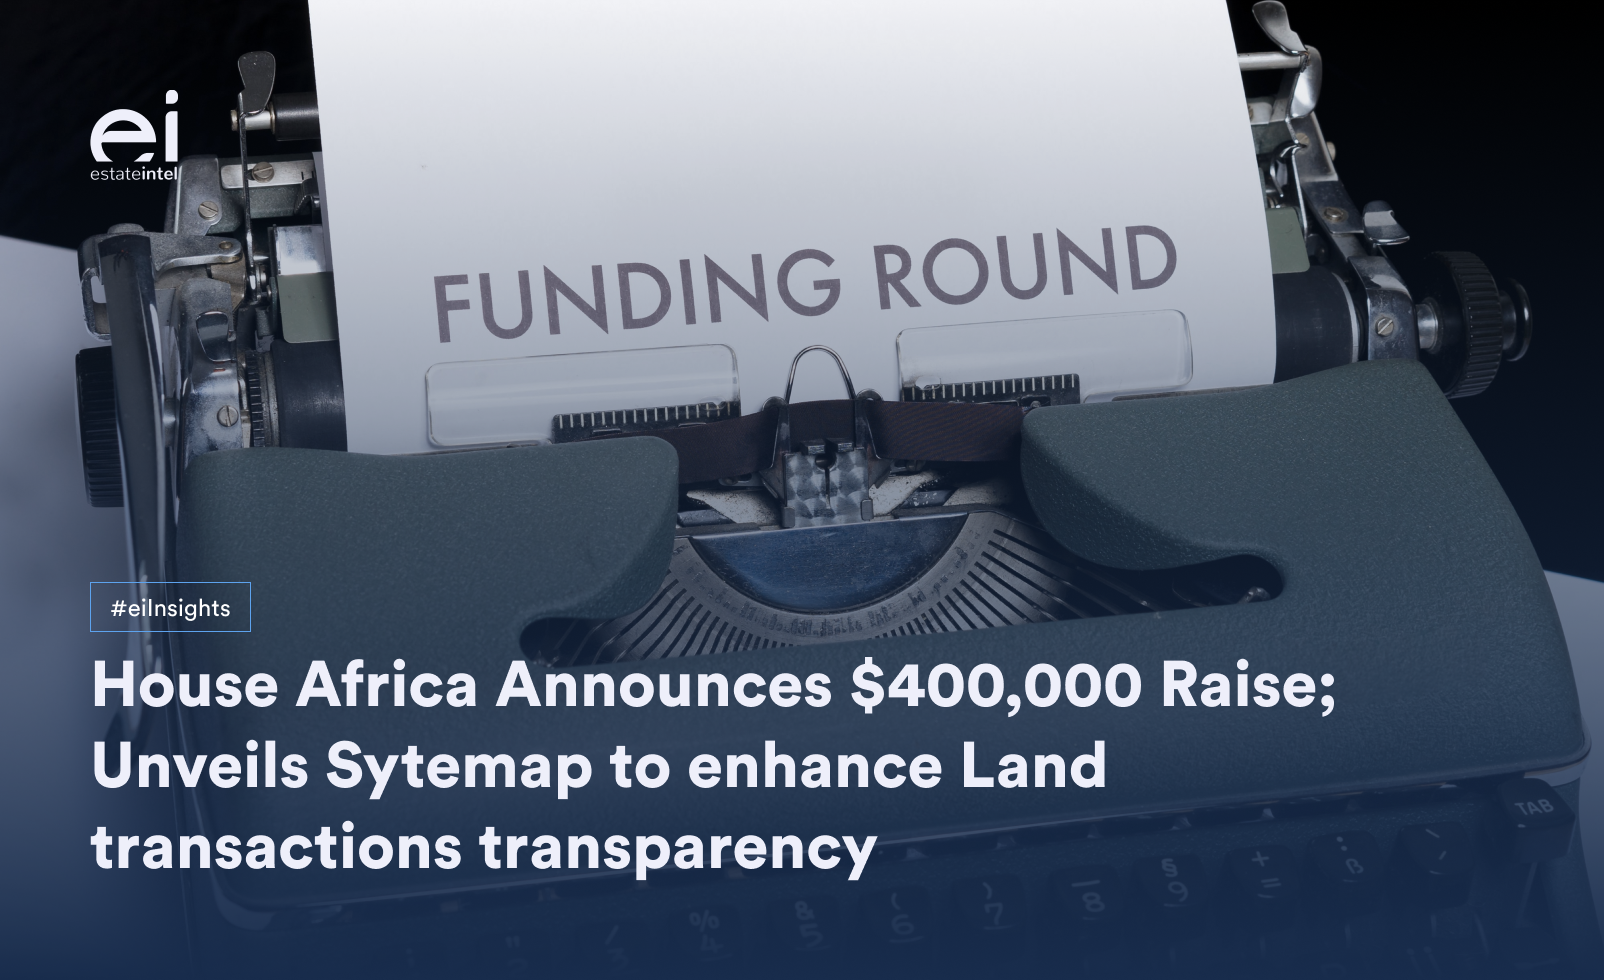 House Africa Announces $400,000 Raise and Unveils Sytemap to enhance Land transactions transparency